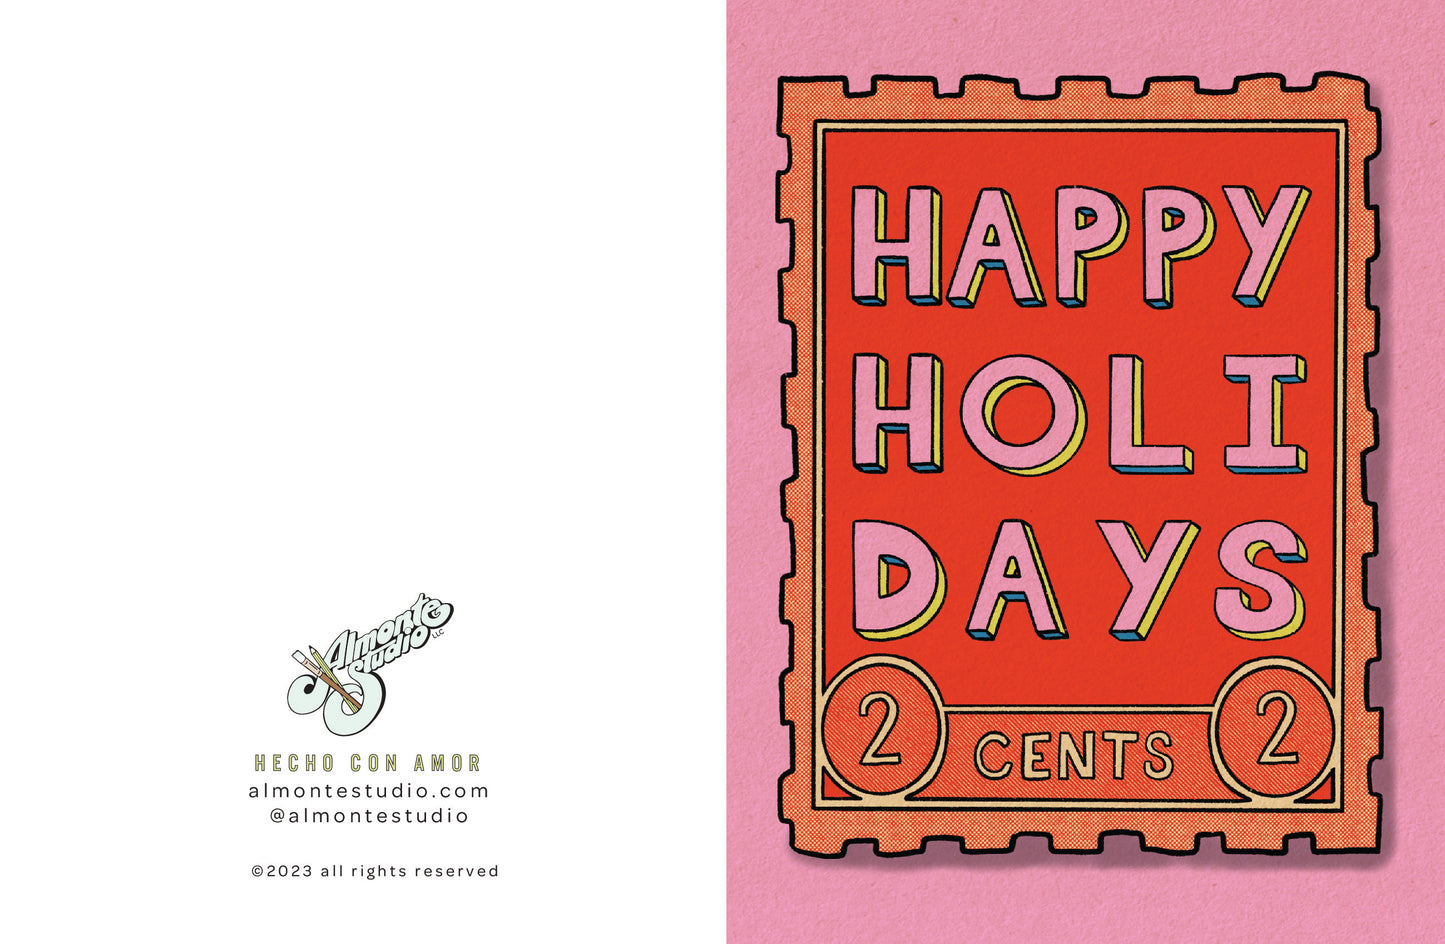 Holiday Stamp Card